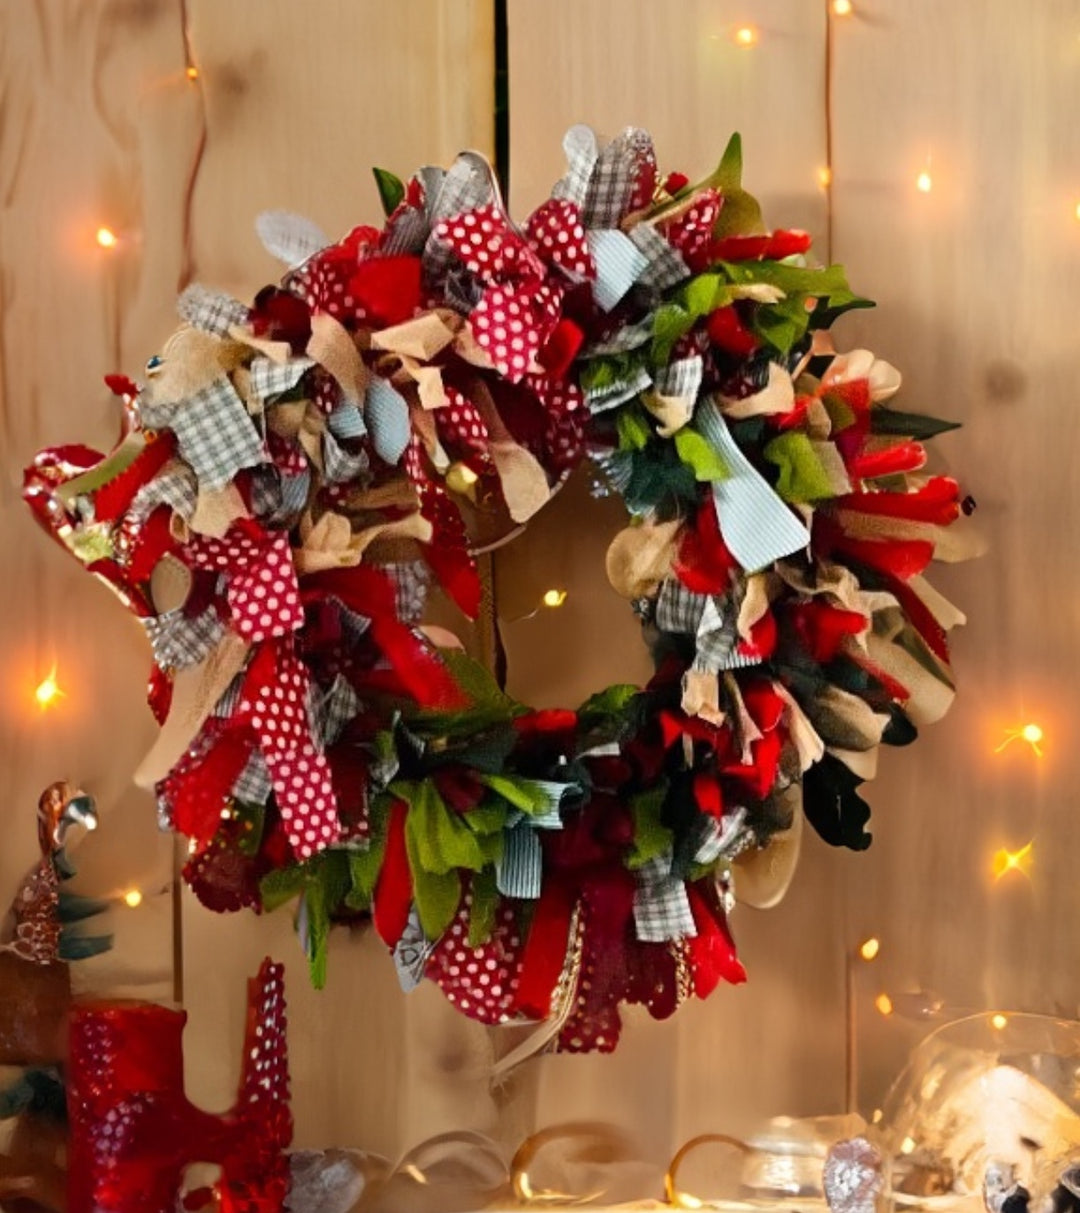 How to make (or buy) a Recycled Fabric Christmas Wreath